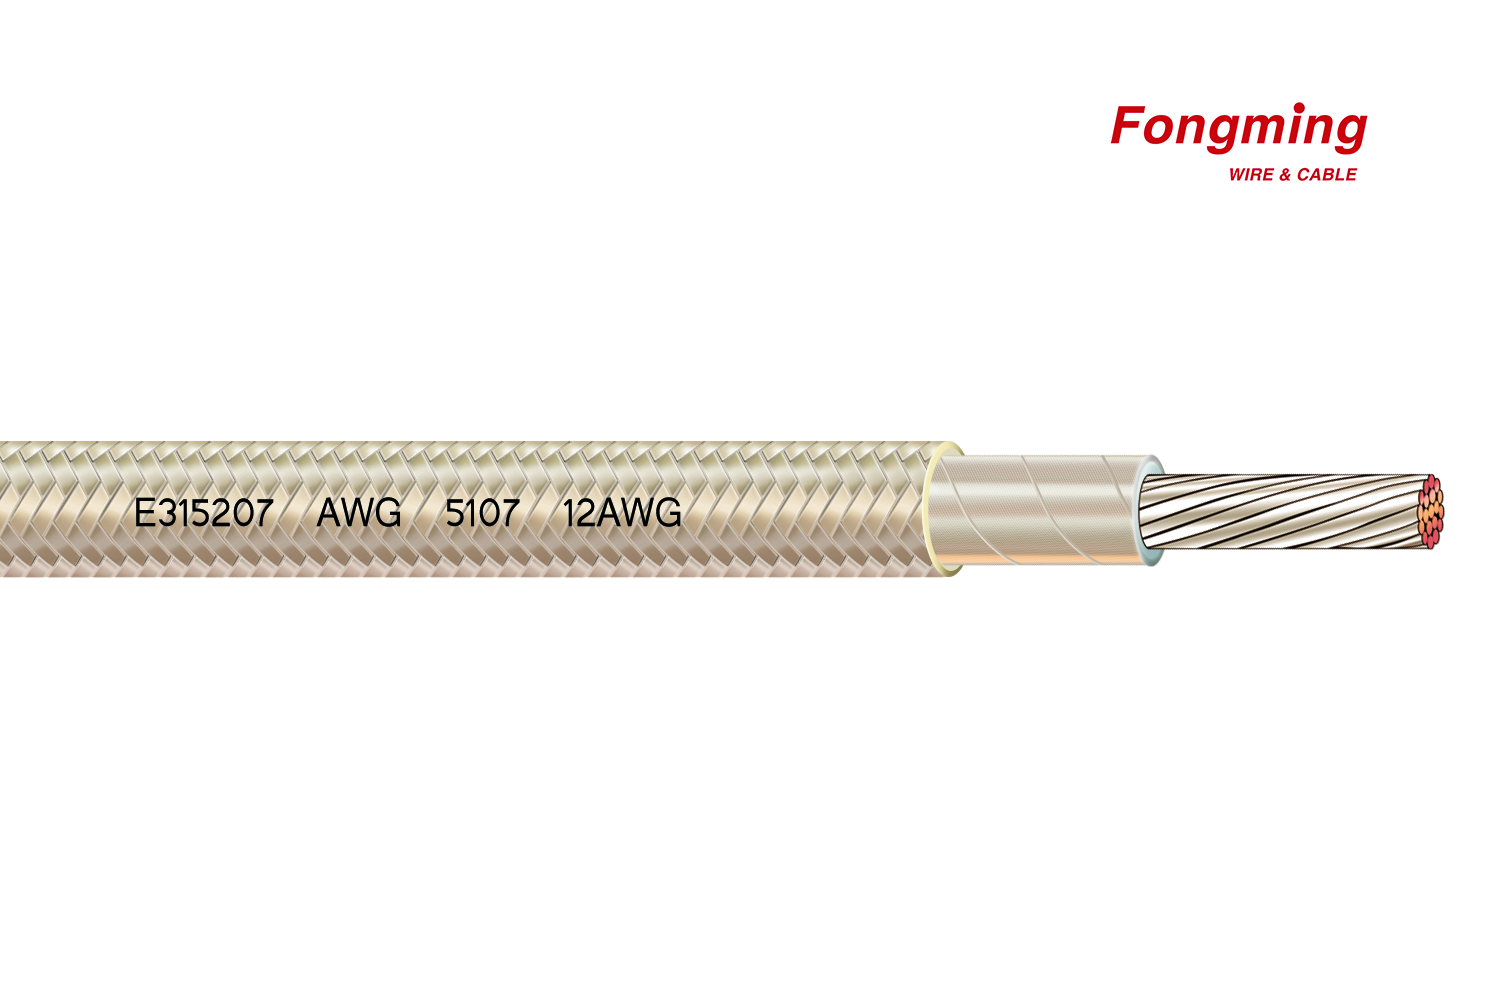 Yangzhou Fongming Cable: Talking about the technology of wrapping wire